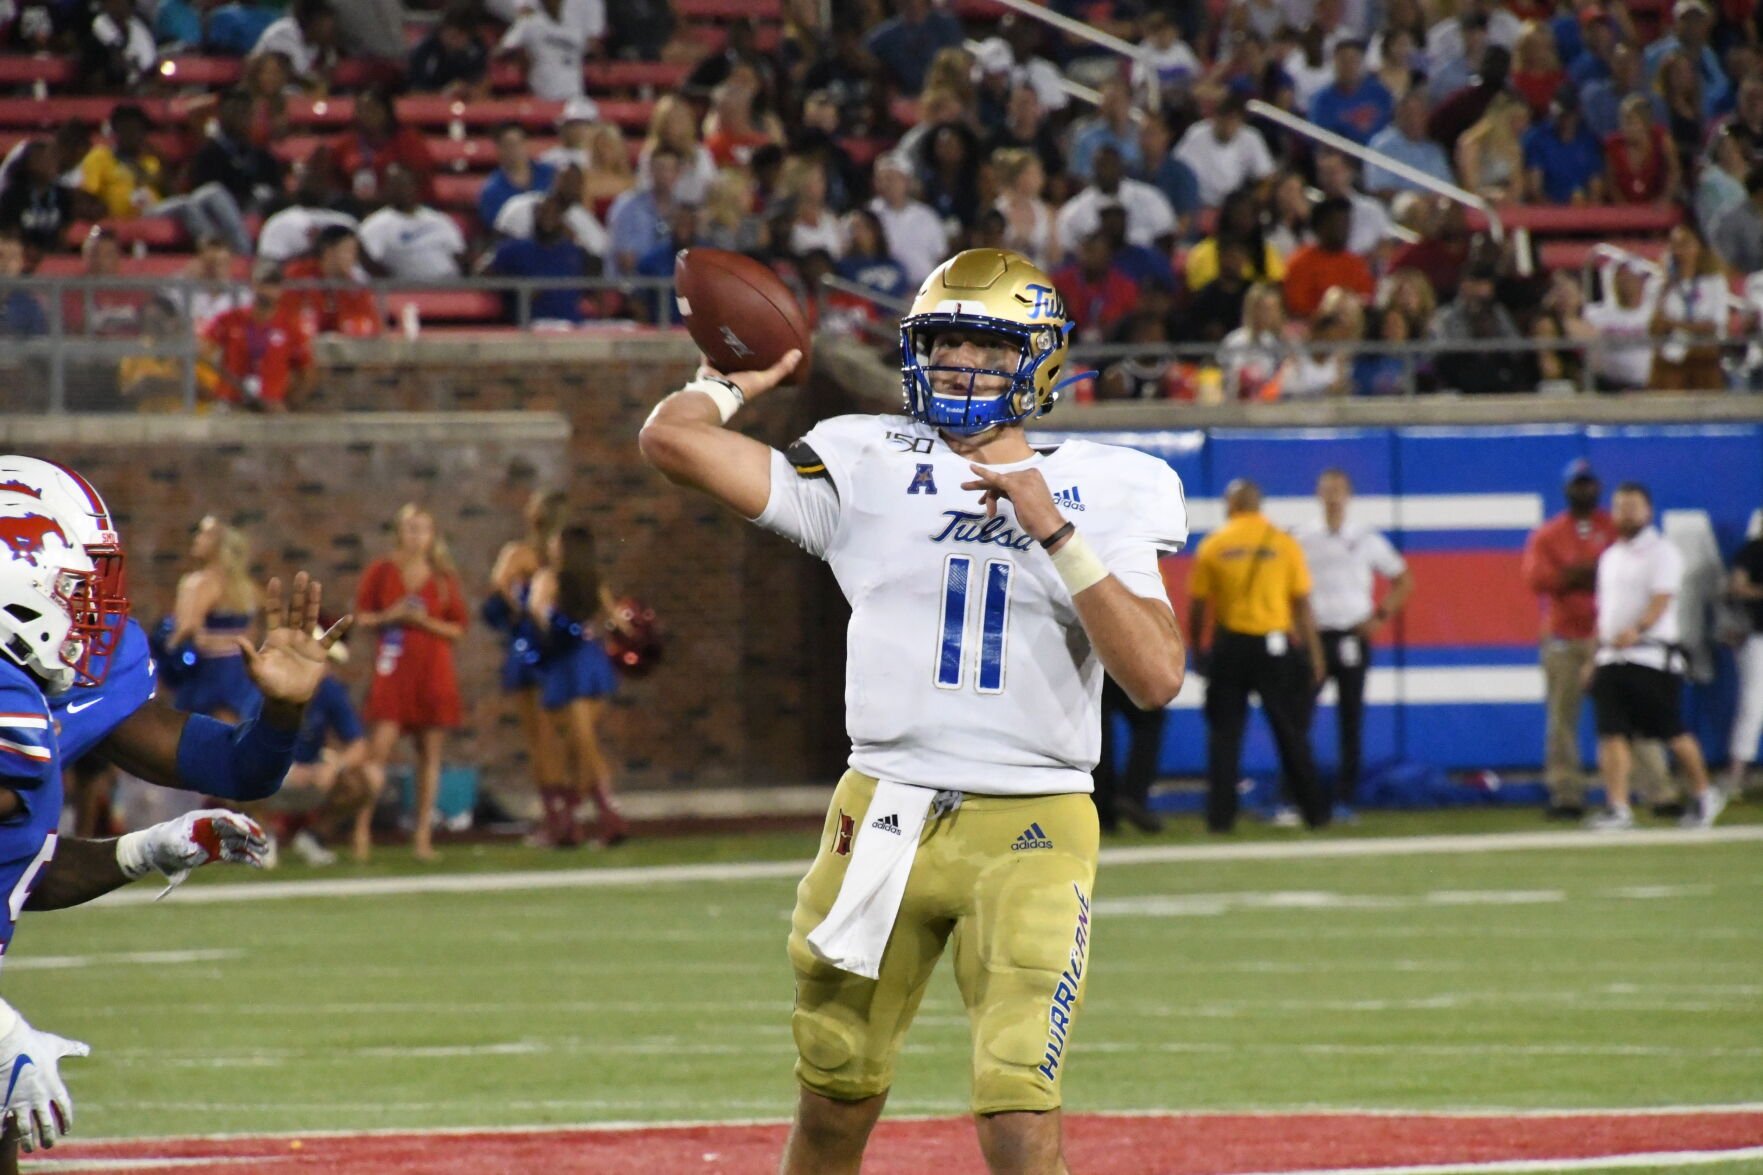 Grandviews Zach Smith selected by New Orleans in USFL Draft Local News cleburnetimesreview